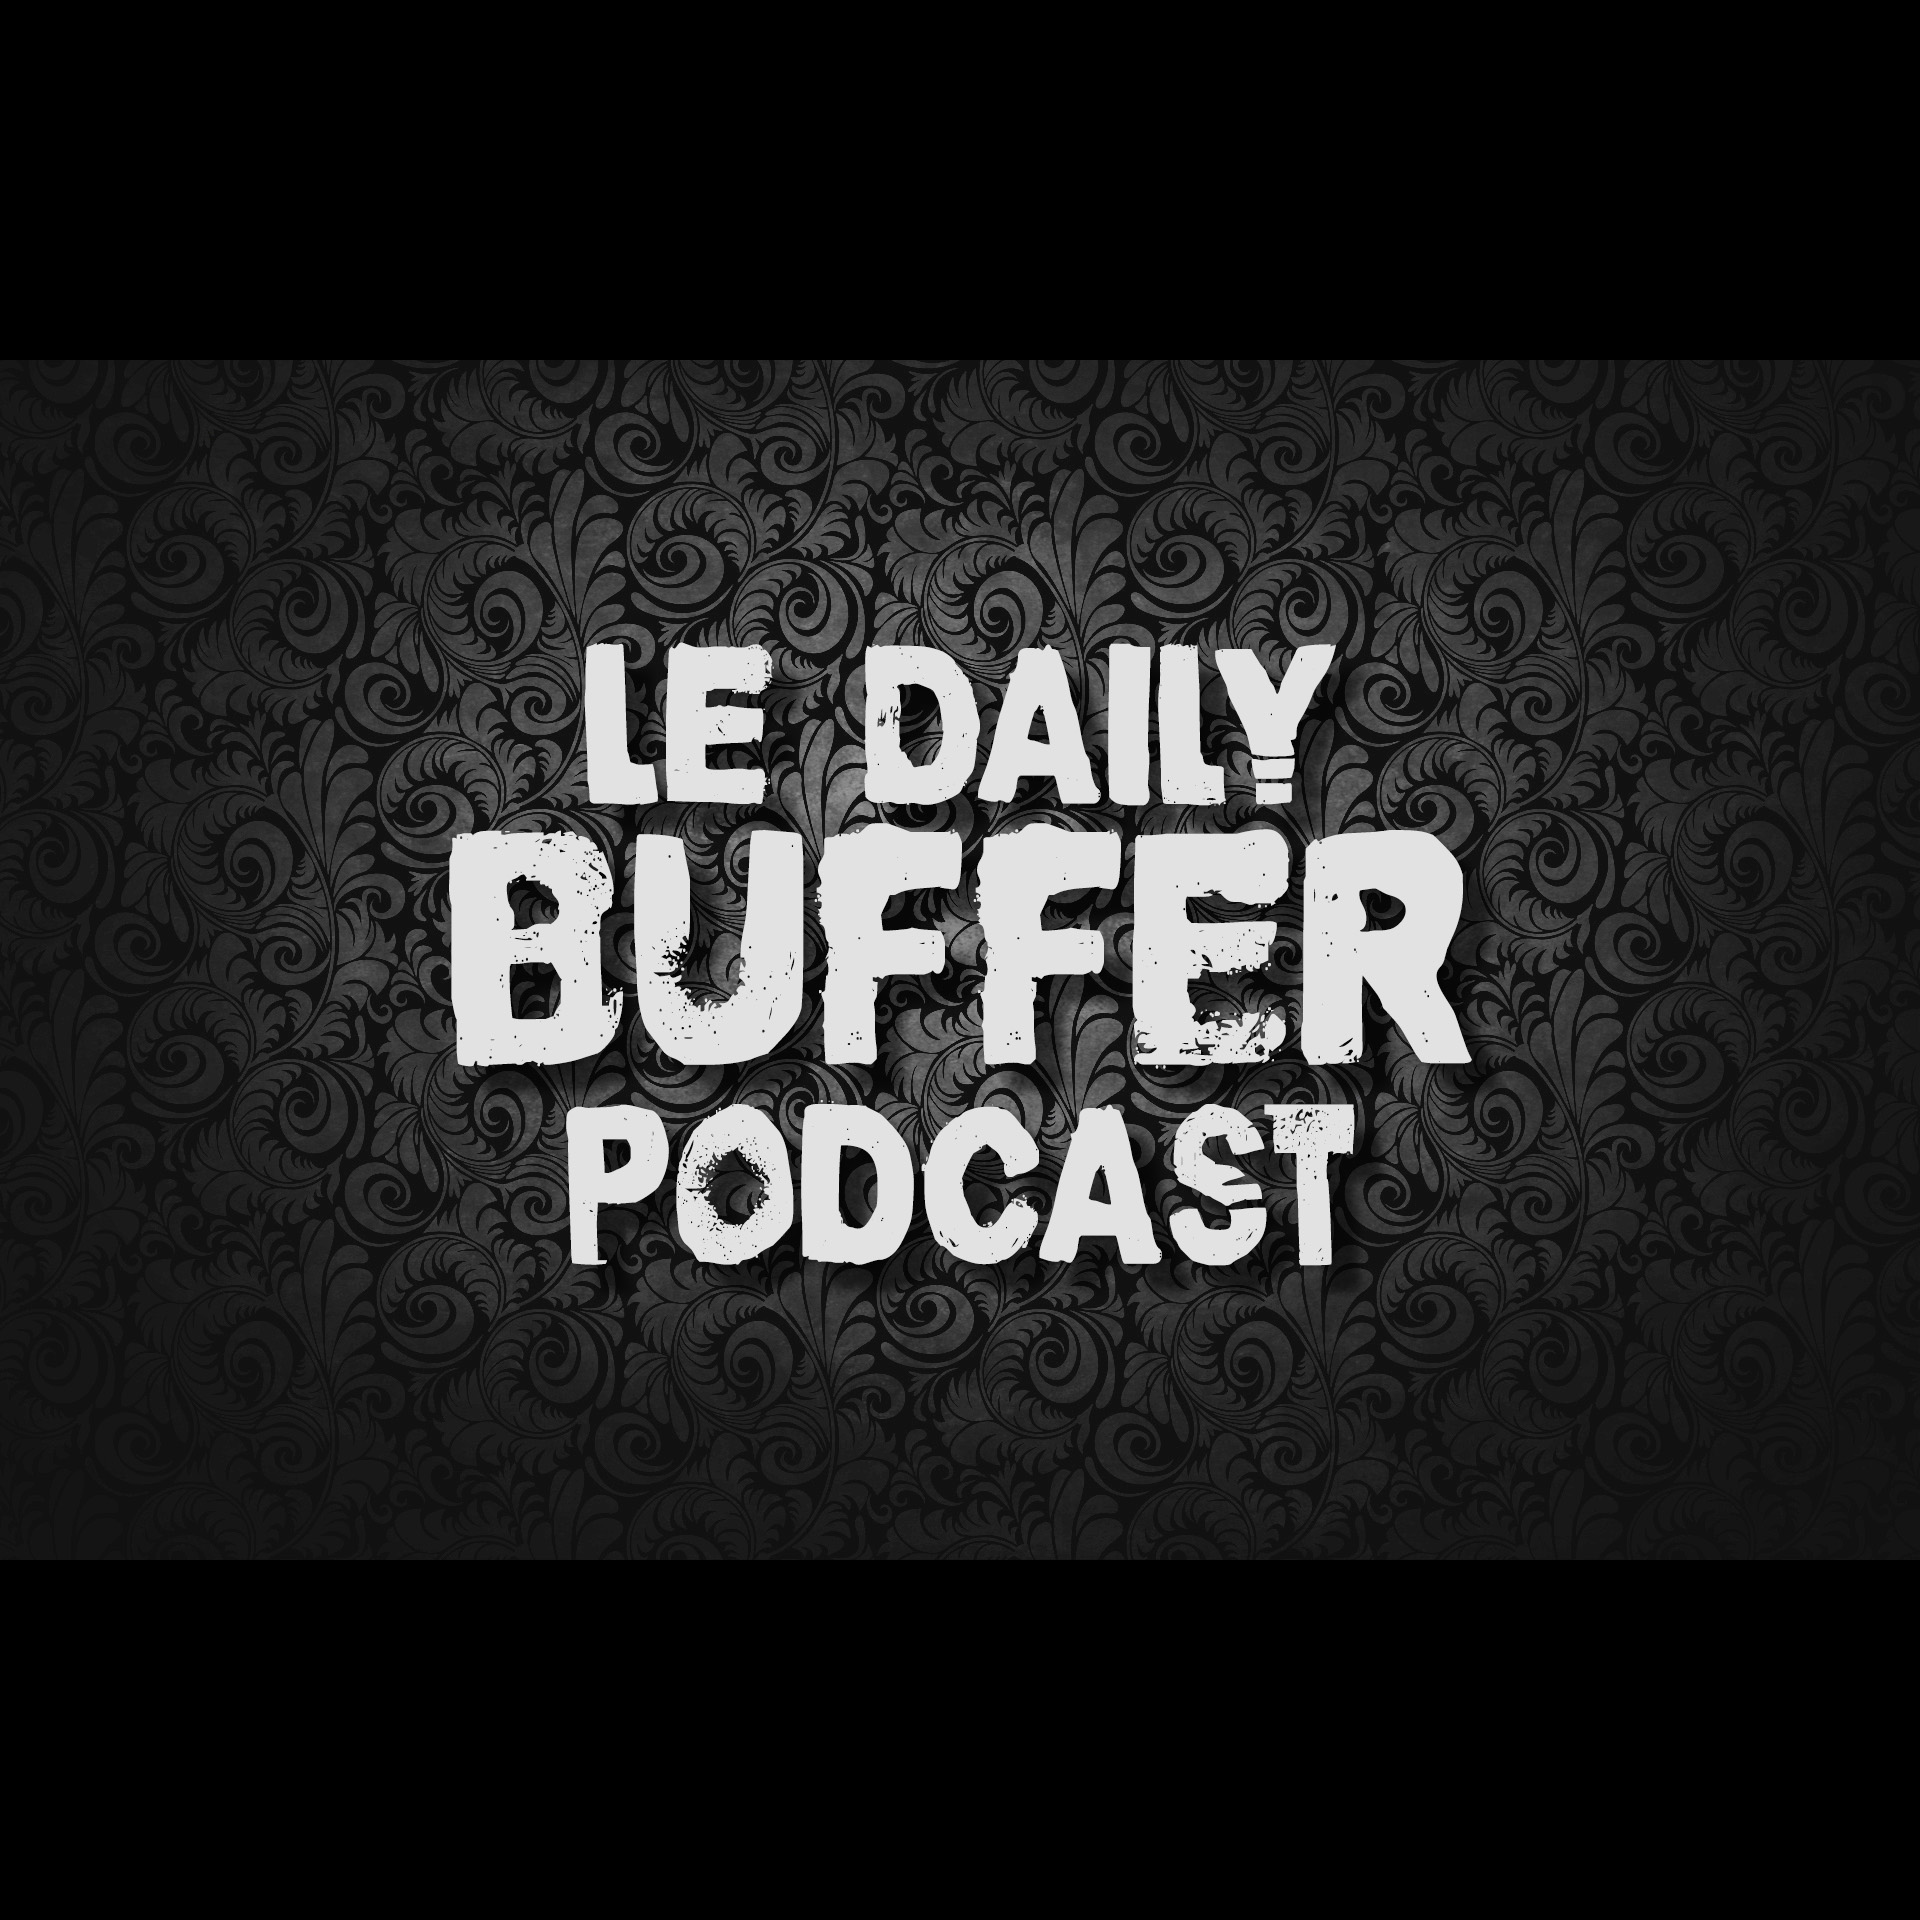 Le Daily Buffer Podcast - 2019 03 06 - Le Pharmachien